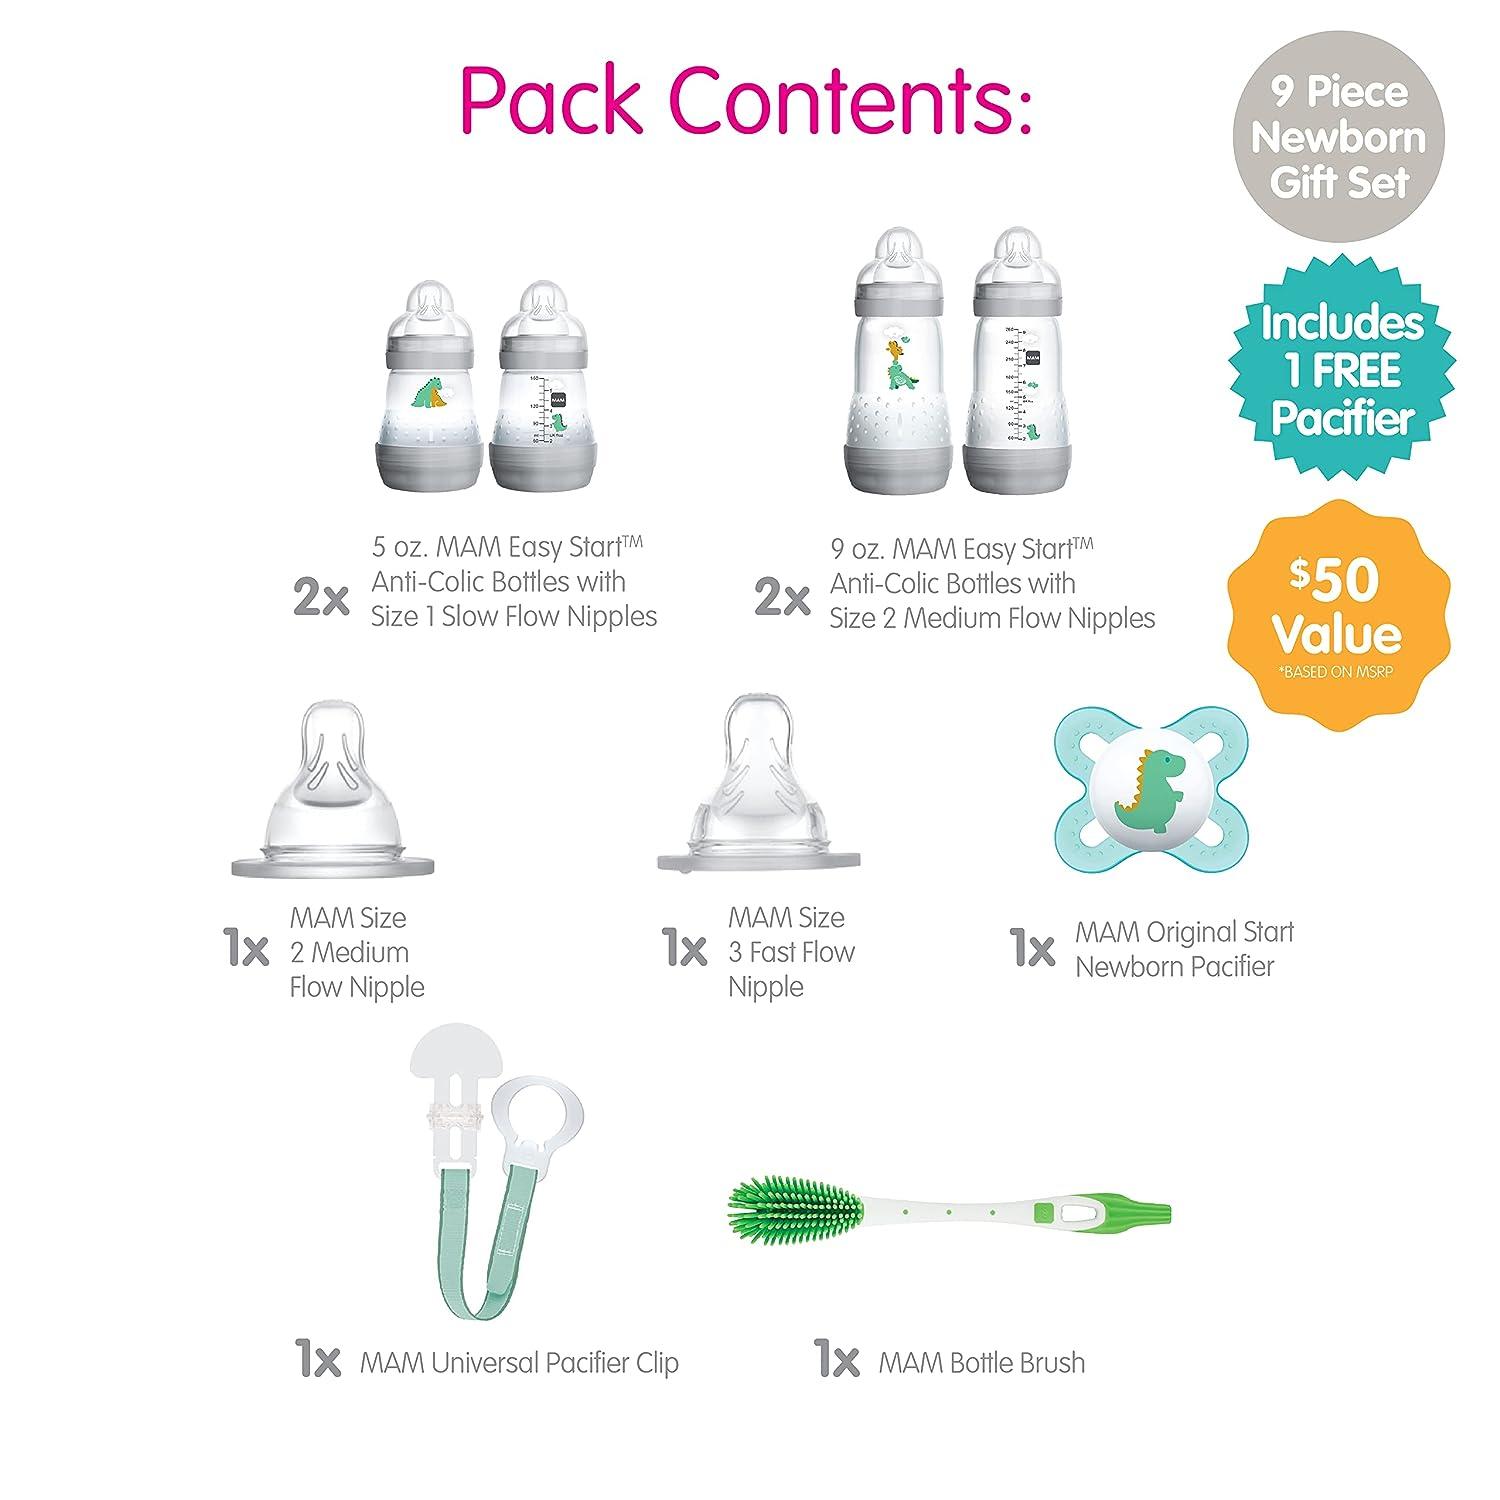 MAM Welcome Home Gift Set (9-Piece) Easy Start Anti-Colic Baby